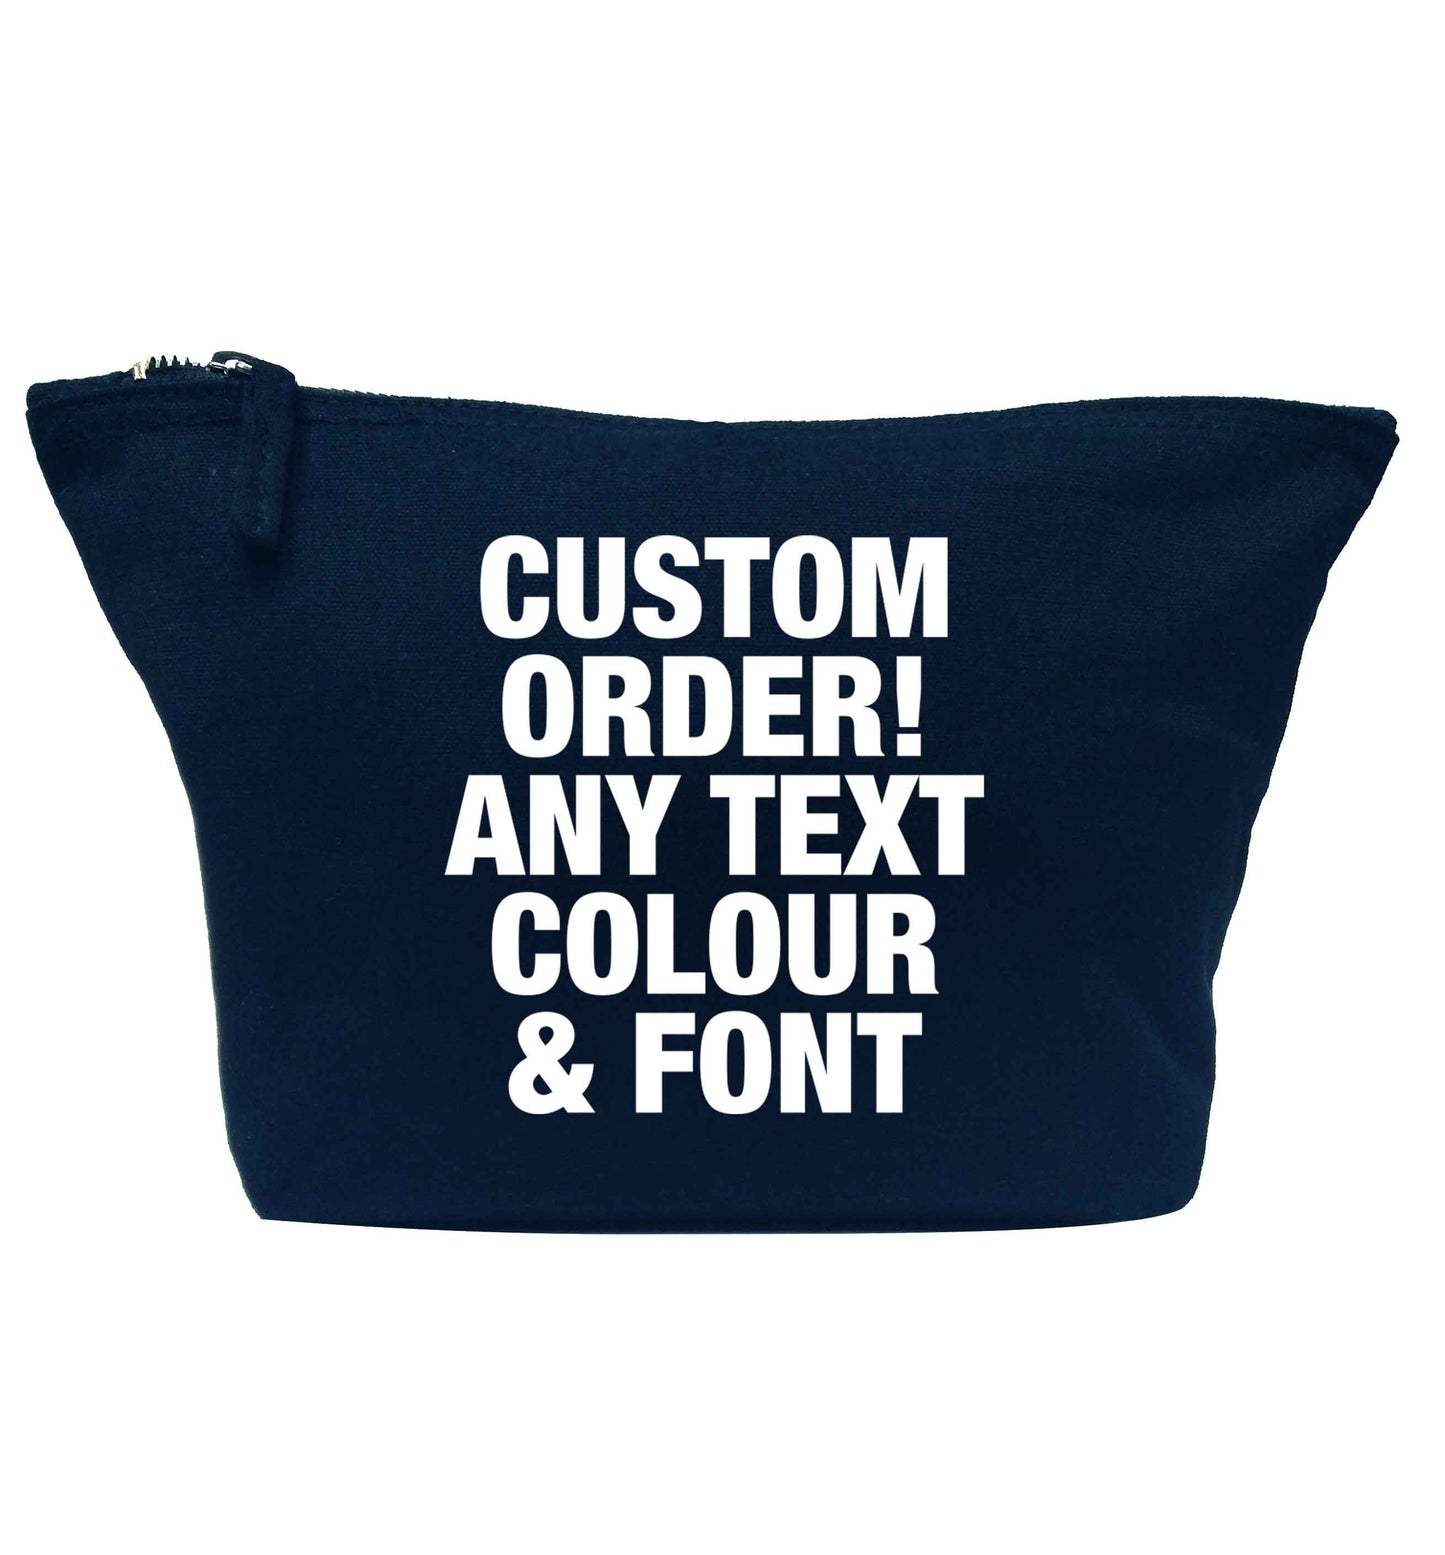 Custom order any text colour and font navy makeup bag